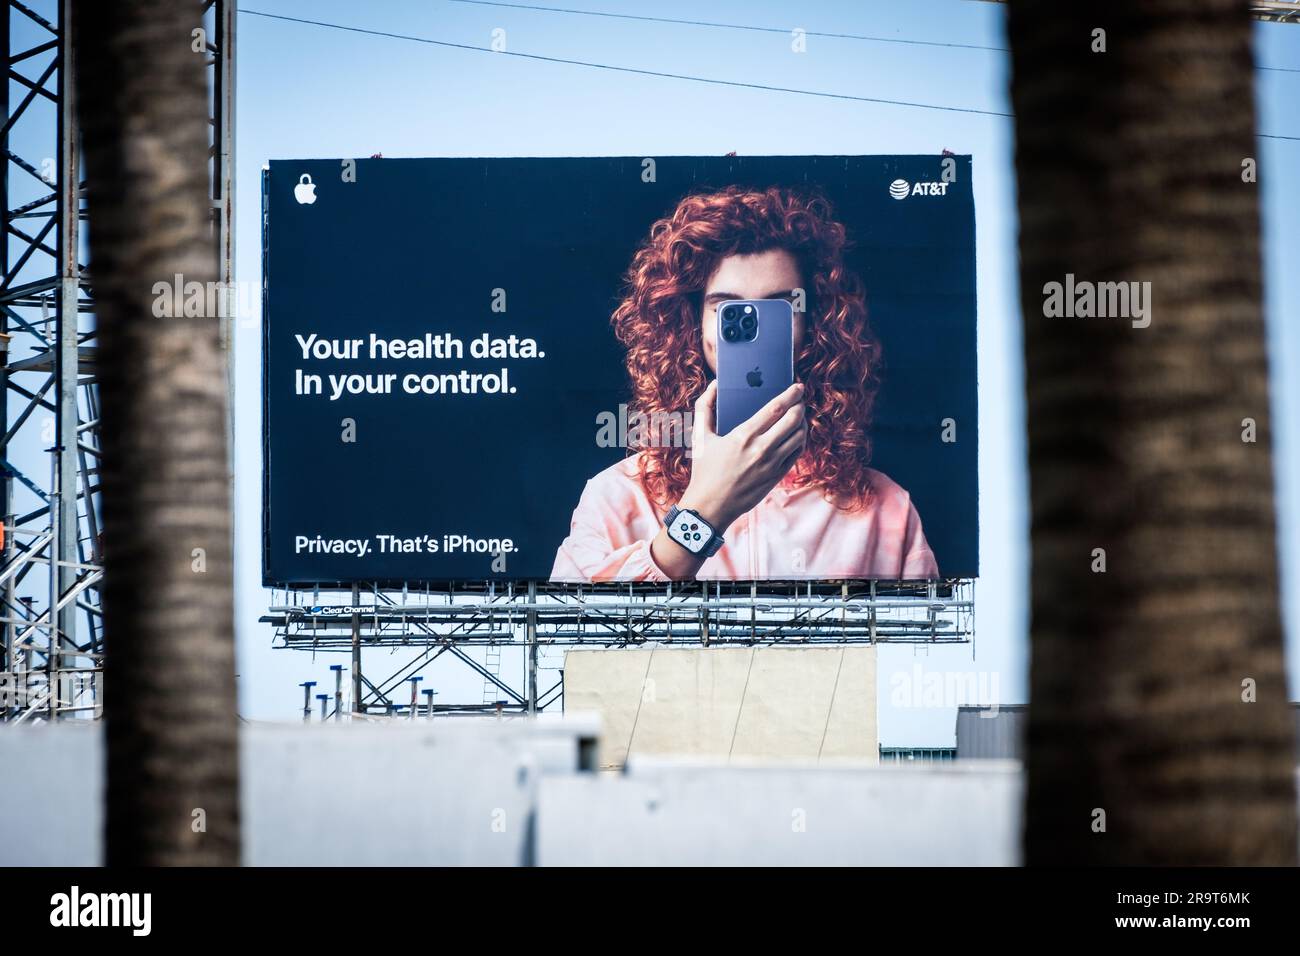 AT&T and iPhone advertisement, Los Angeles, California, USA. Stock Photo